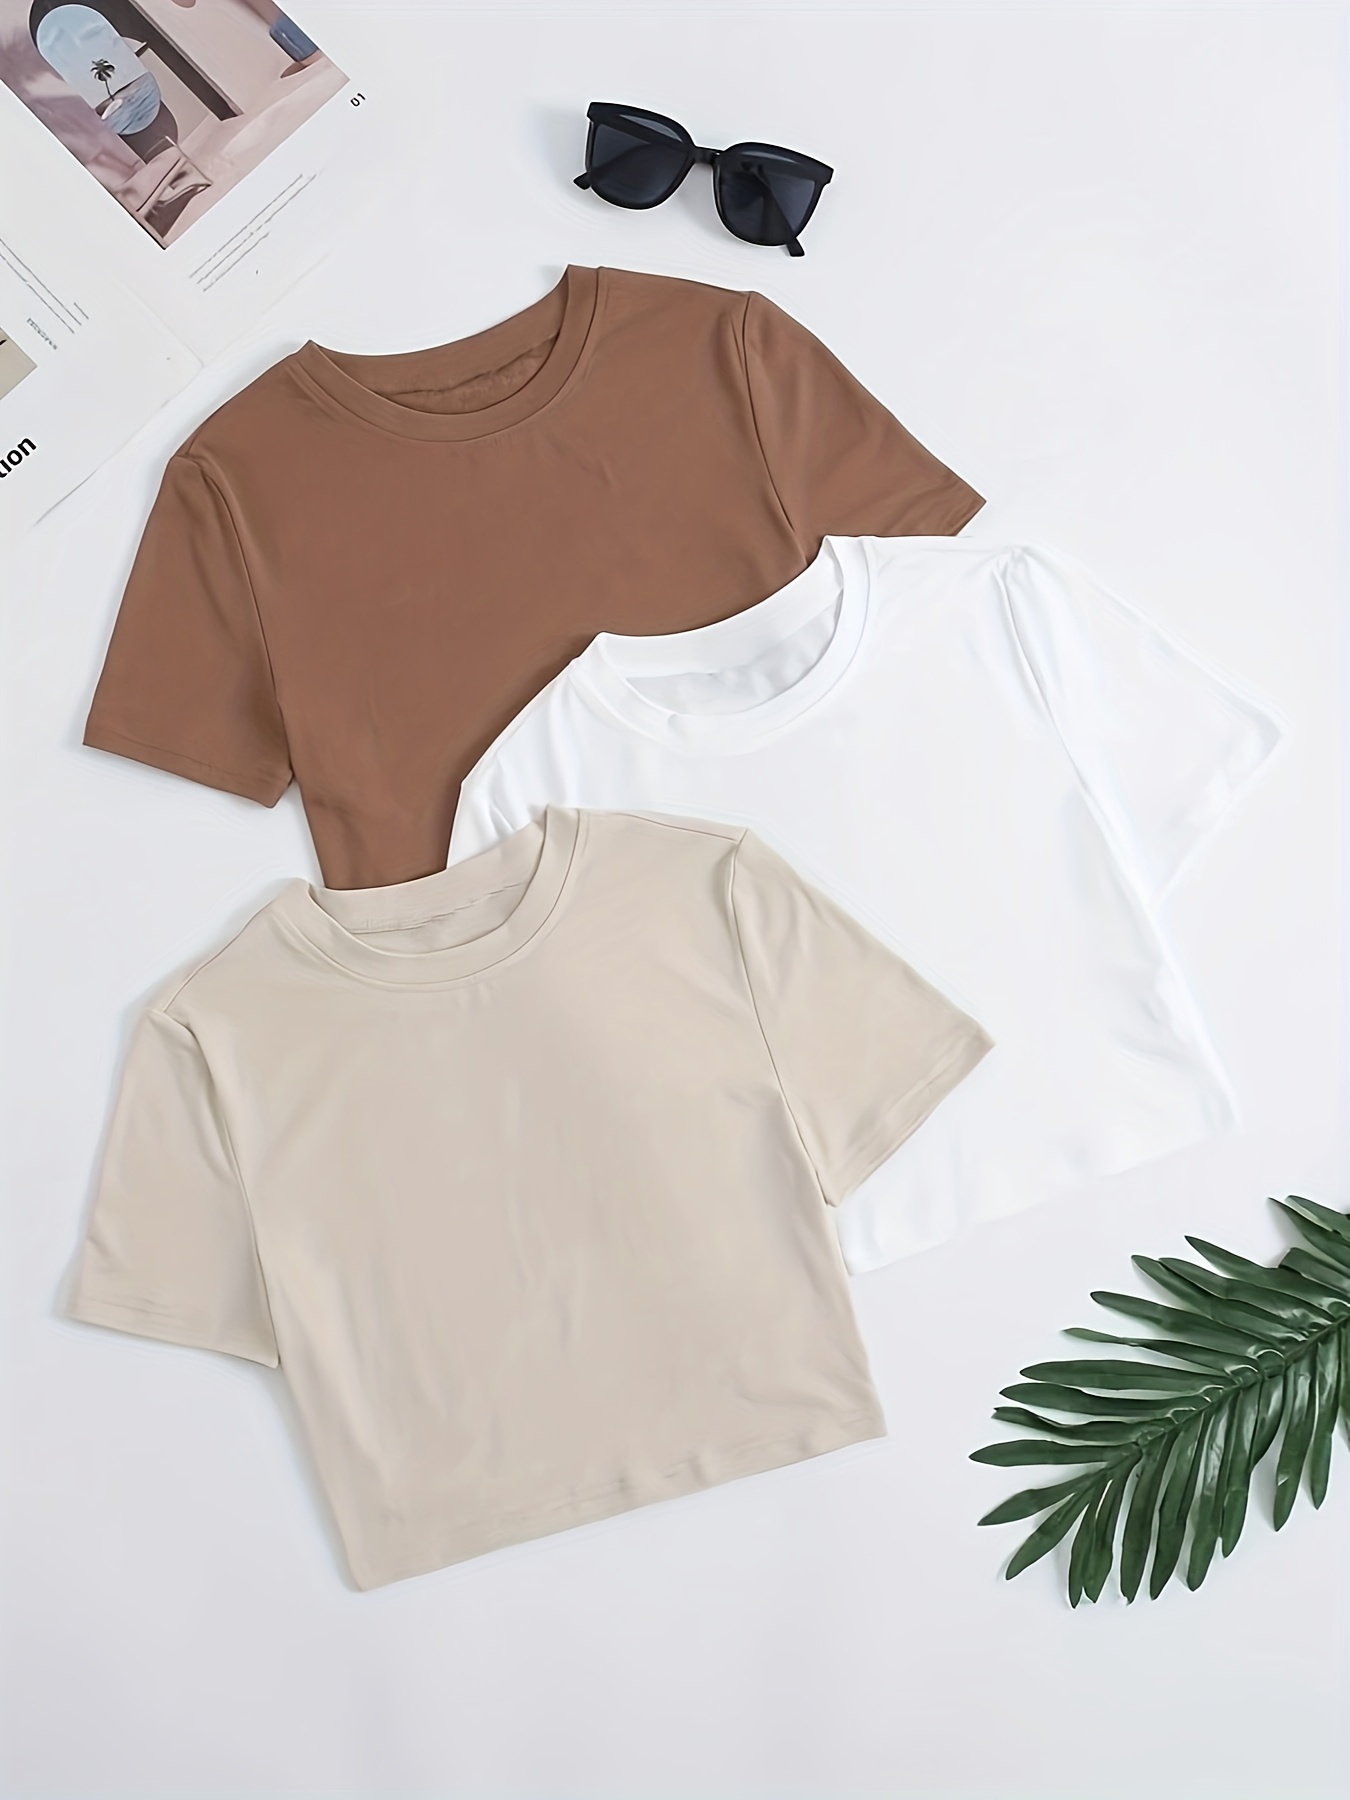 tklpehg Summer Tops for Women Clearance Ladies Tops Casual Relaxed Fit  Short Sleeve T Shirts Lapel Solid Color Blouses Beige 4 (S)